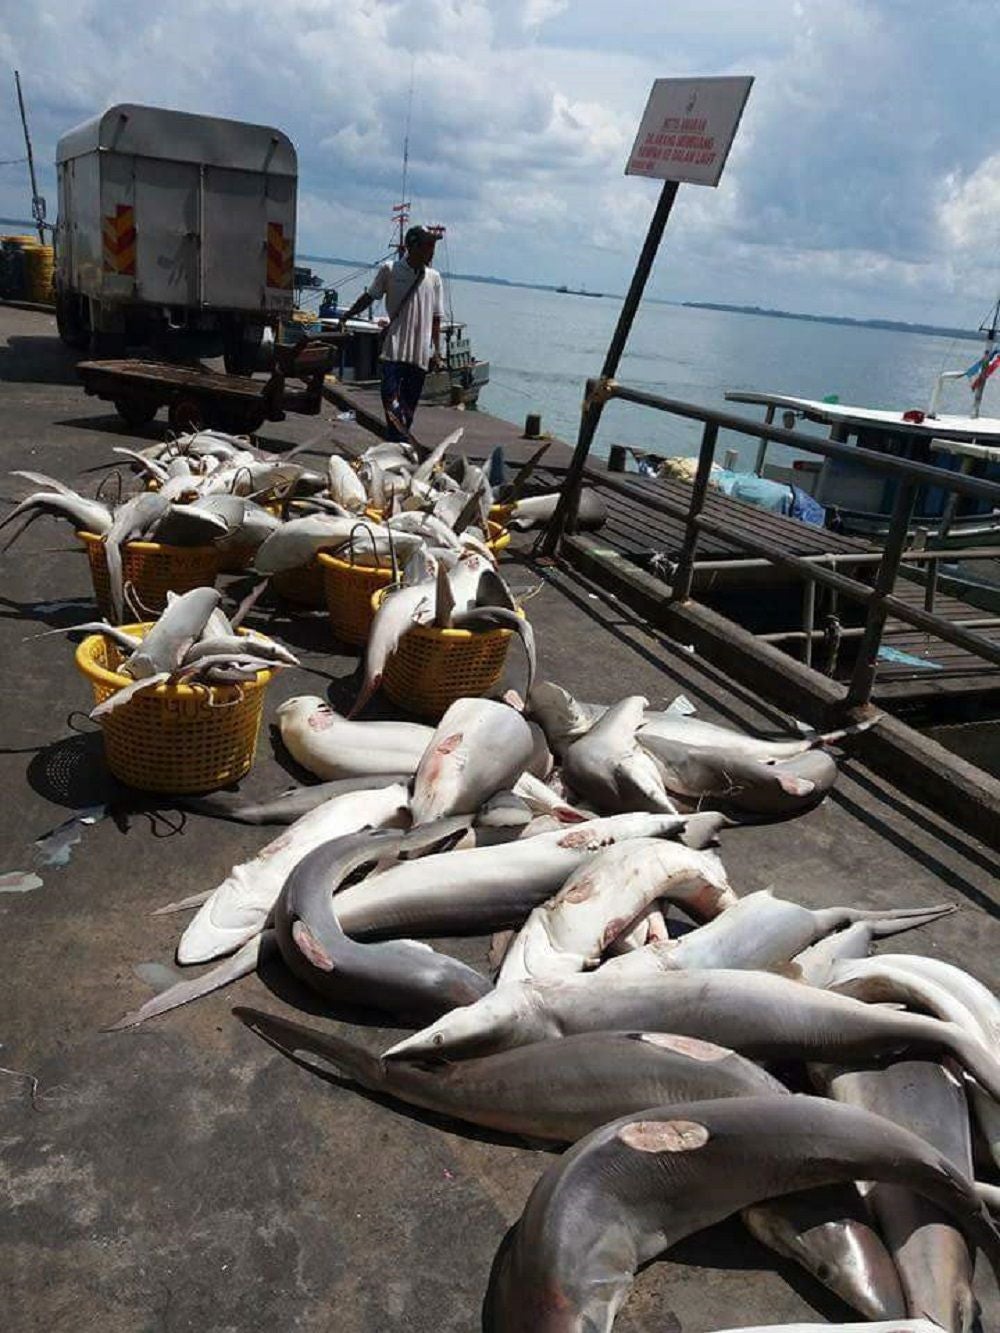 Malaysia Recorded As The World 2nd Largest Importer Of Shark Fins In The Entire World - WORLD OF BUZZ 3